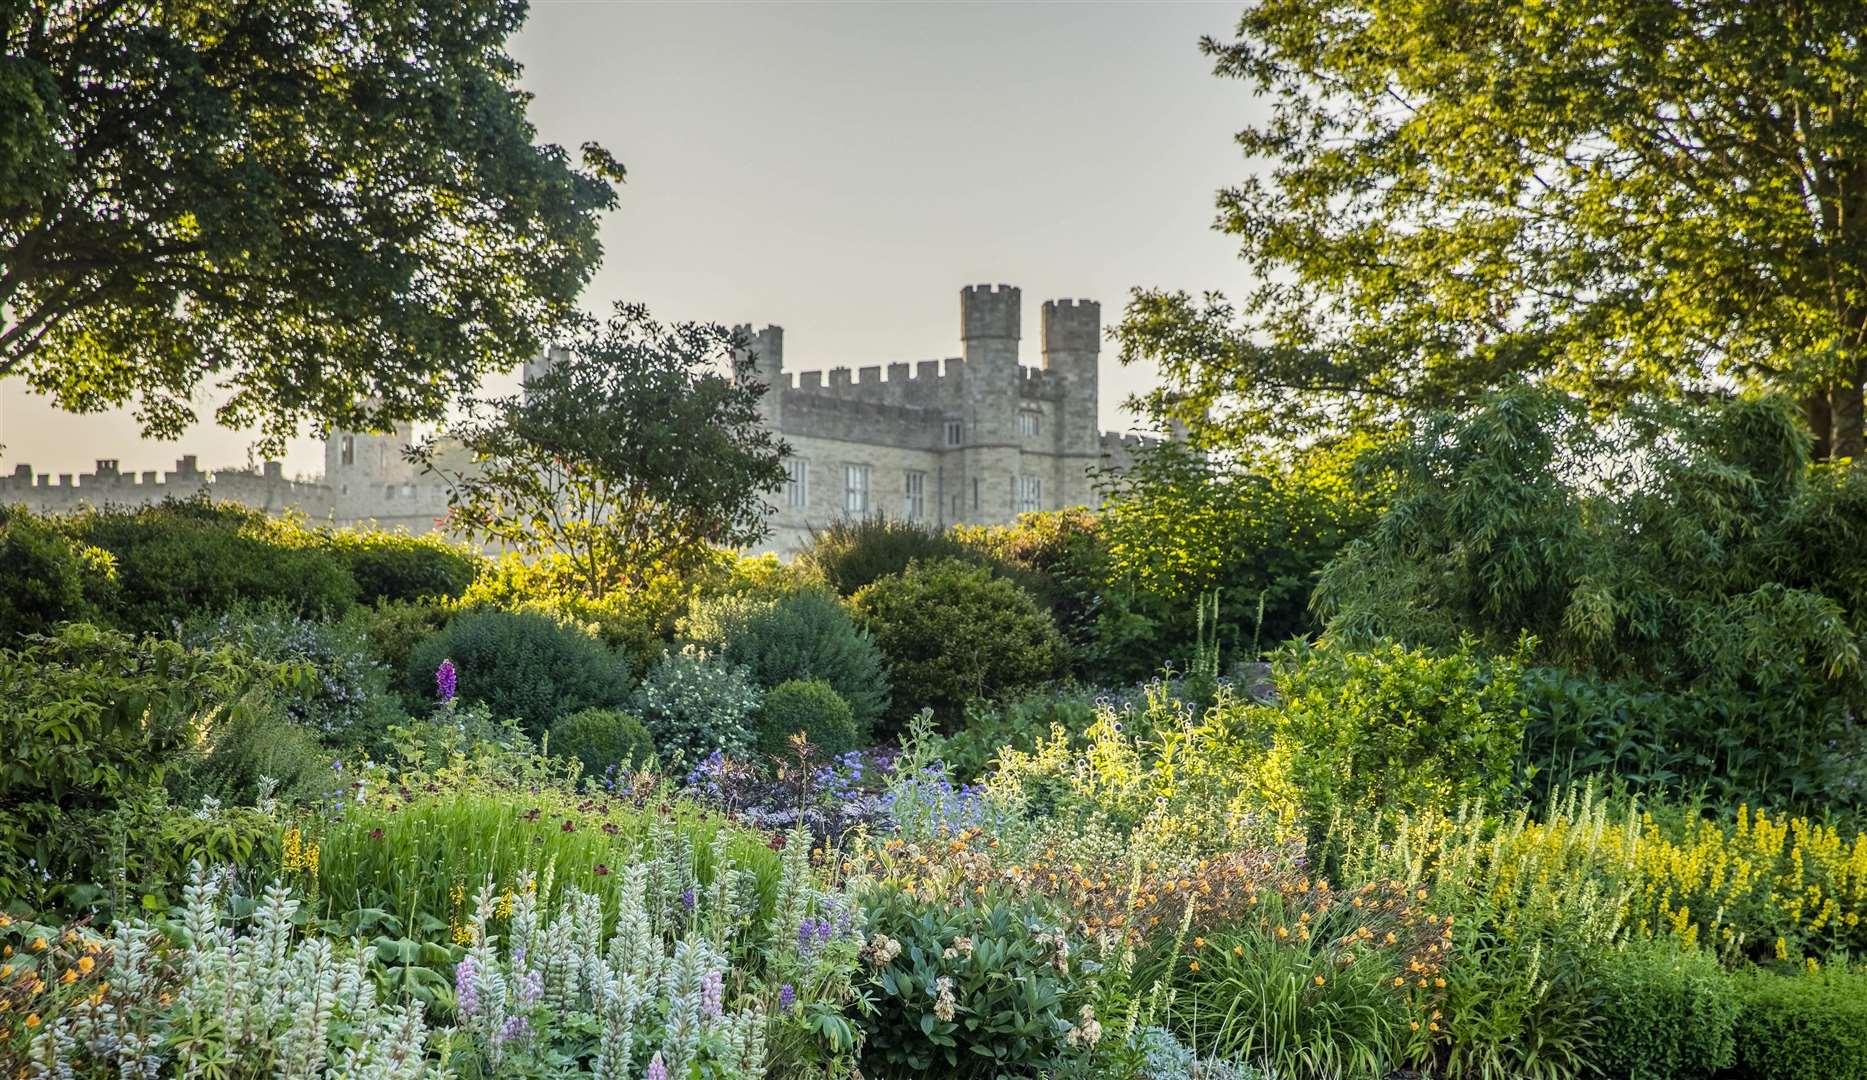 Leeds Castle attracts visitors from across the world. Picture: Thomas Alexander